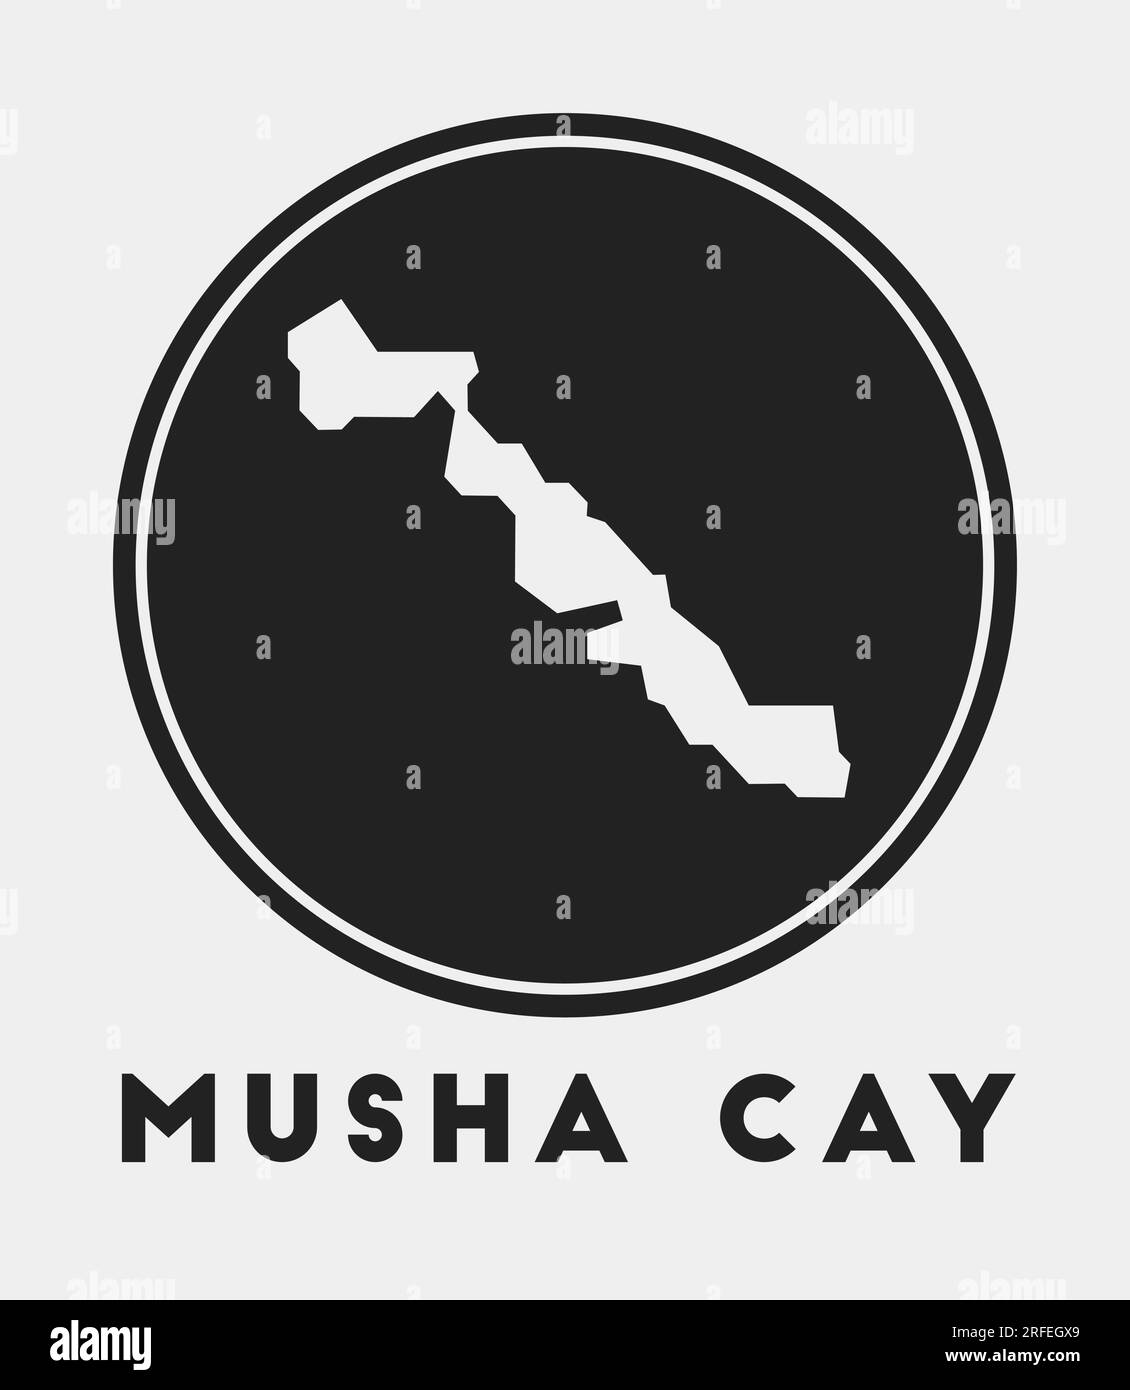 Musha Cay icon. Round logo with island map and title. Stylish Musha Cay badge with map. Vector illustration. Stock Vector